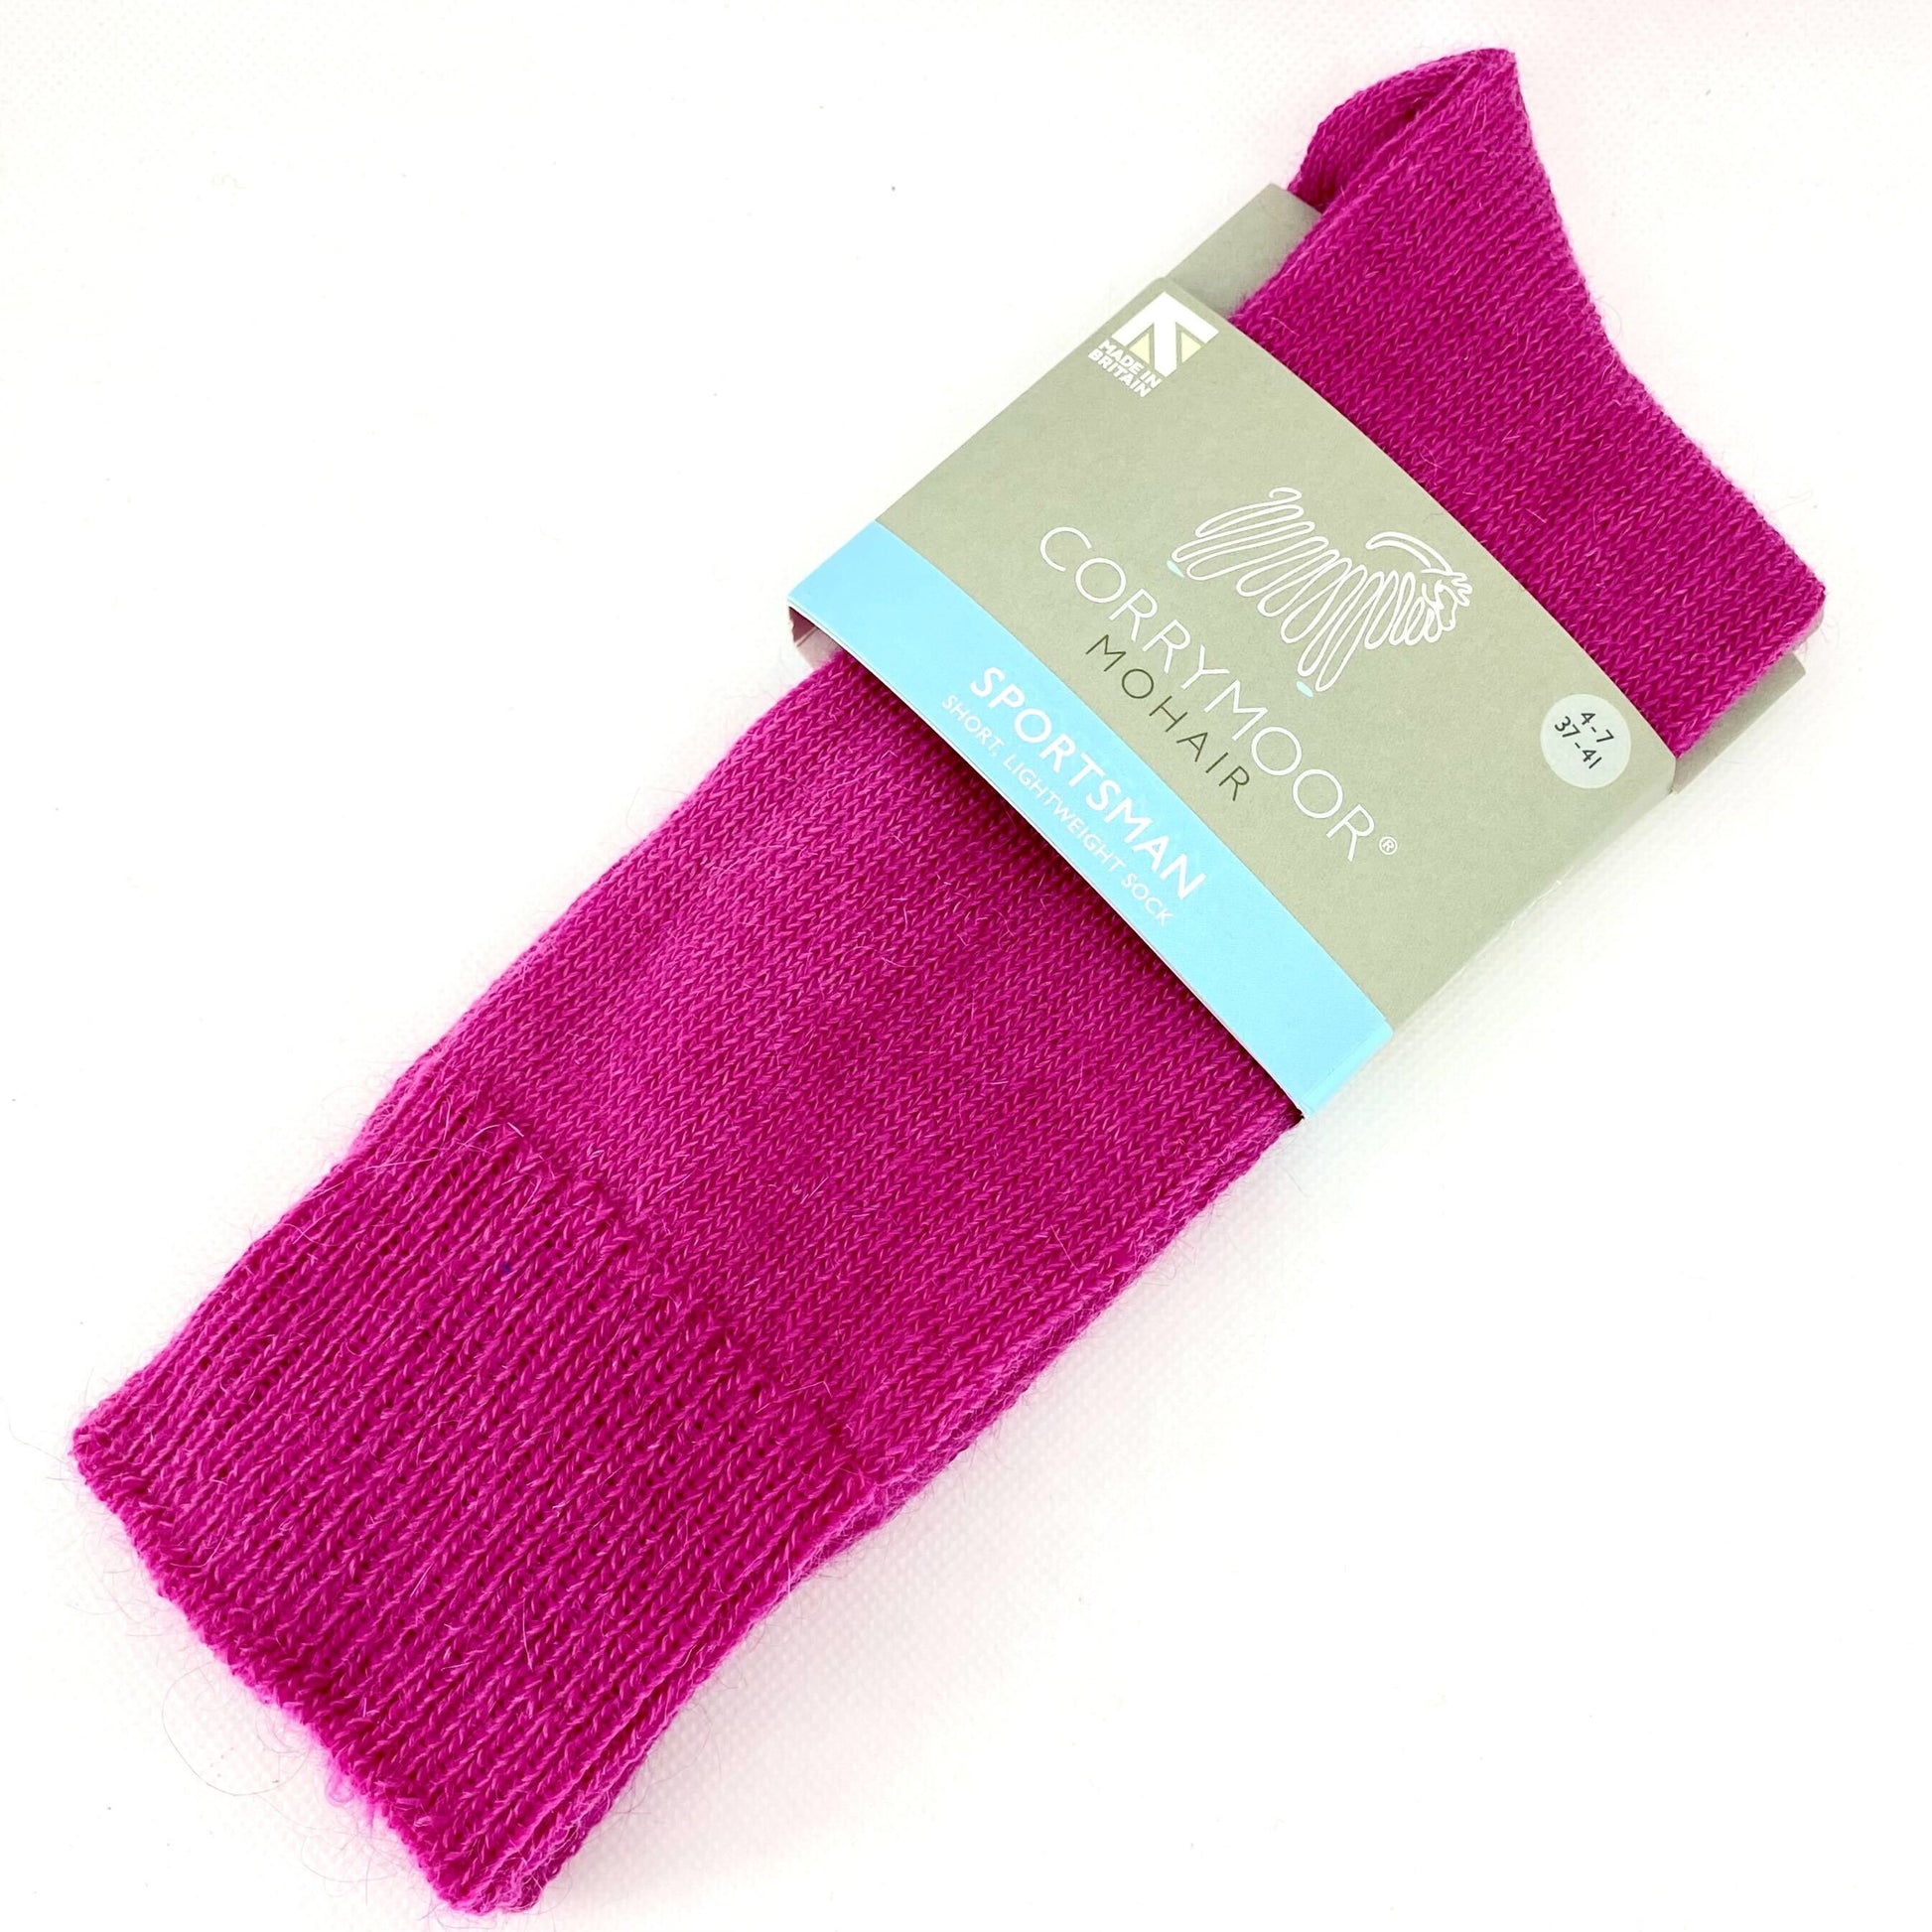 Pink Mohair Socks - The Bristol Artisan Handmade Sustainable Gifts and Homewares.